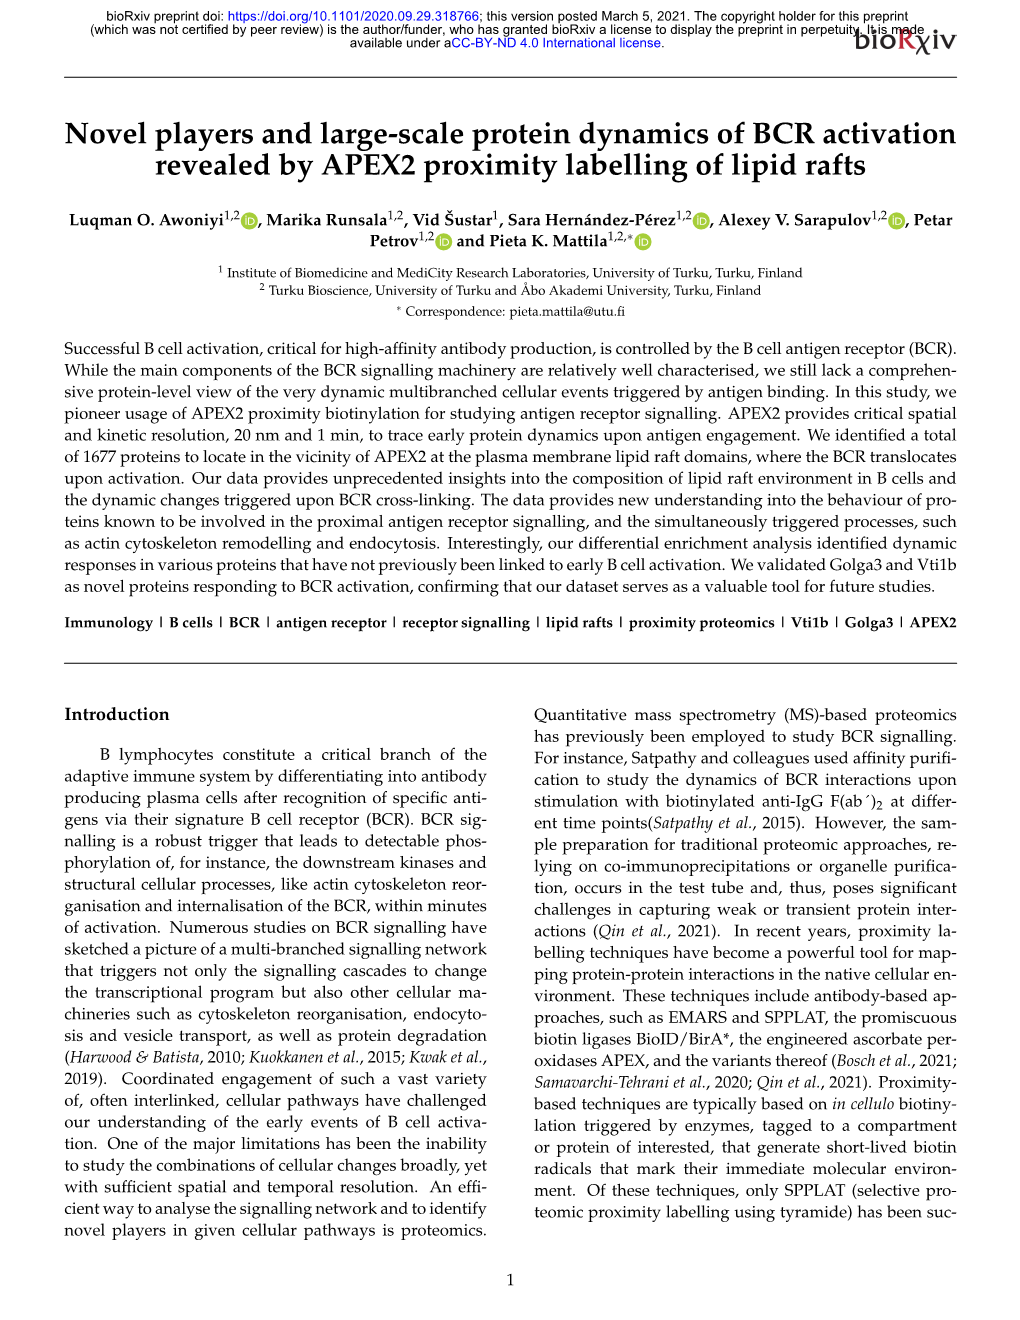 Novel Players and Large-Scale Protein Dynamics of BCR Activation Revealed by APEX2 Proximity Labelling of Lipid Rafts